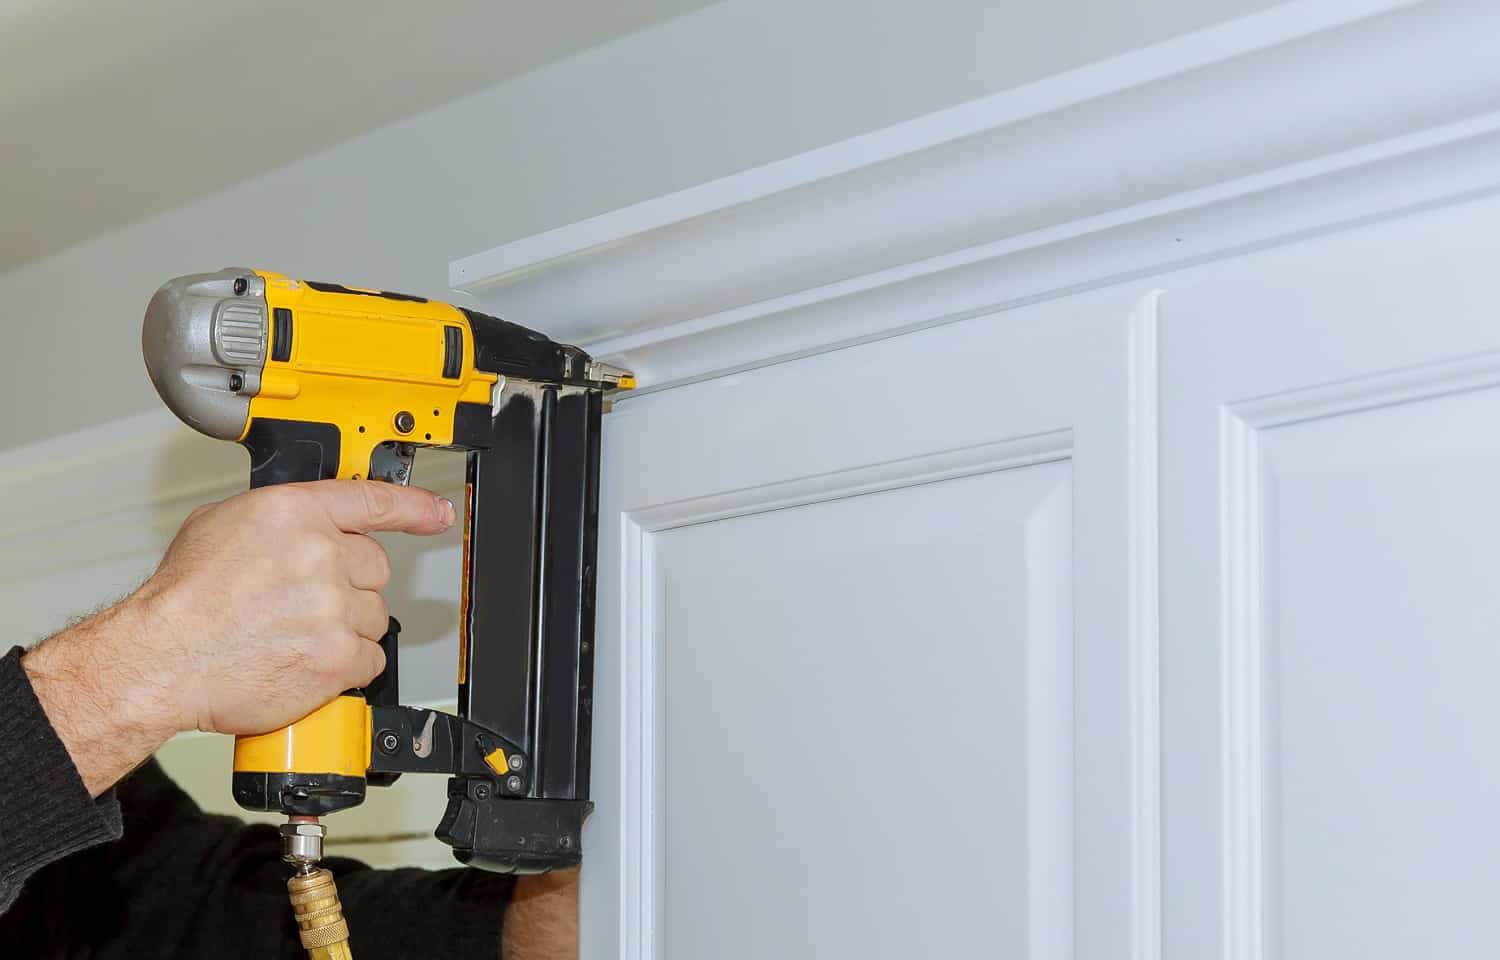 Handyman working using brad nail air gun to Crown Moulding on white kitchen wall cabinets framing trim, with the all power tools